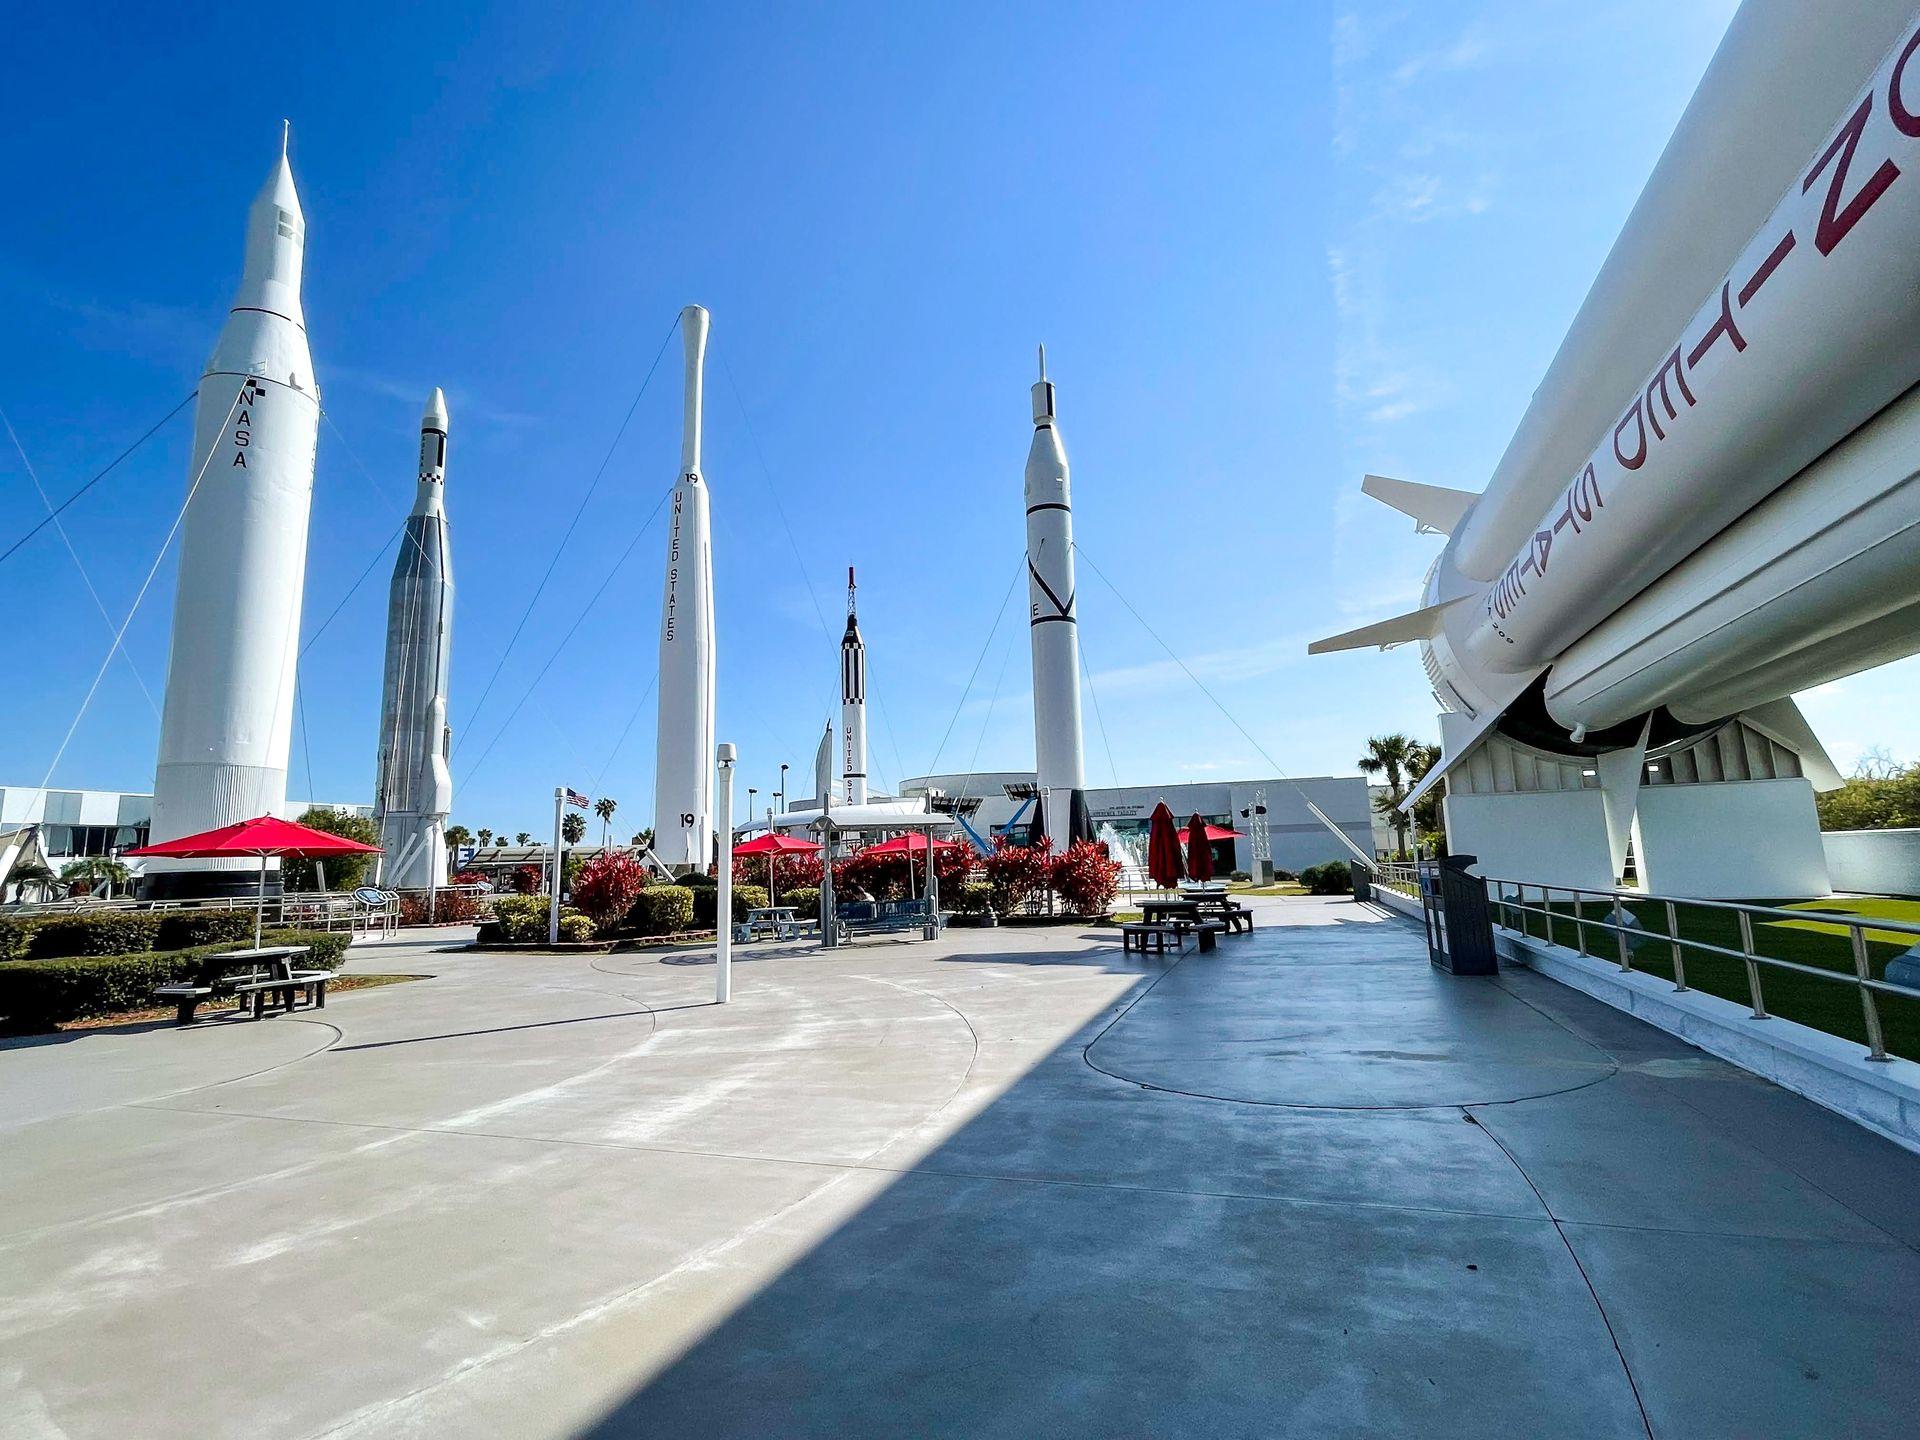 The rocket park in the Kennedy Space Center. Five rockets are standing upright and one rocket is on it's side.